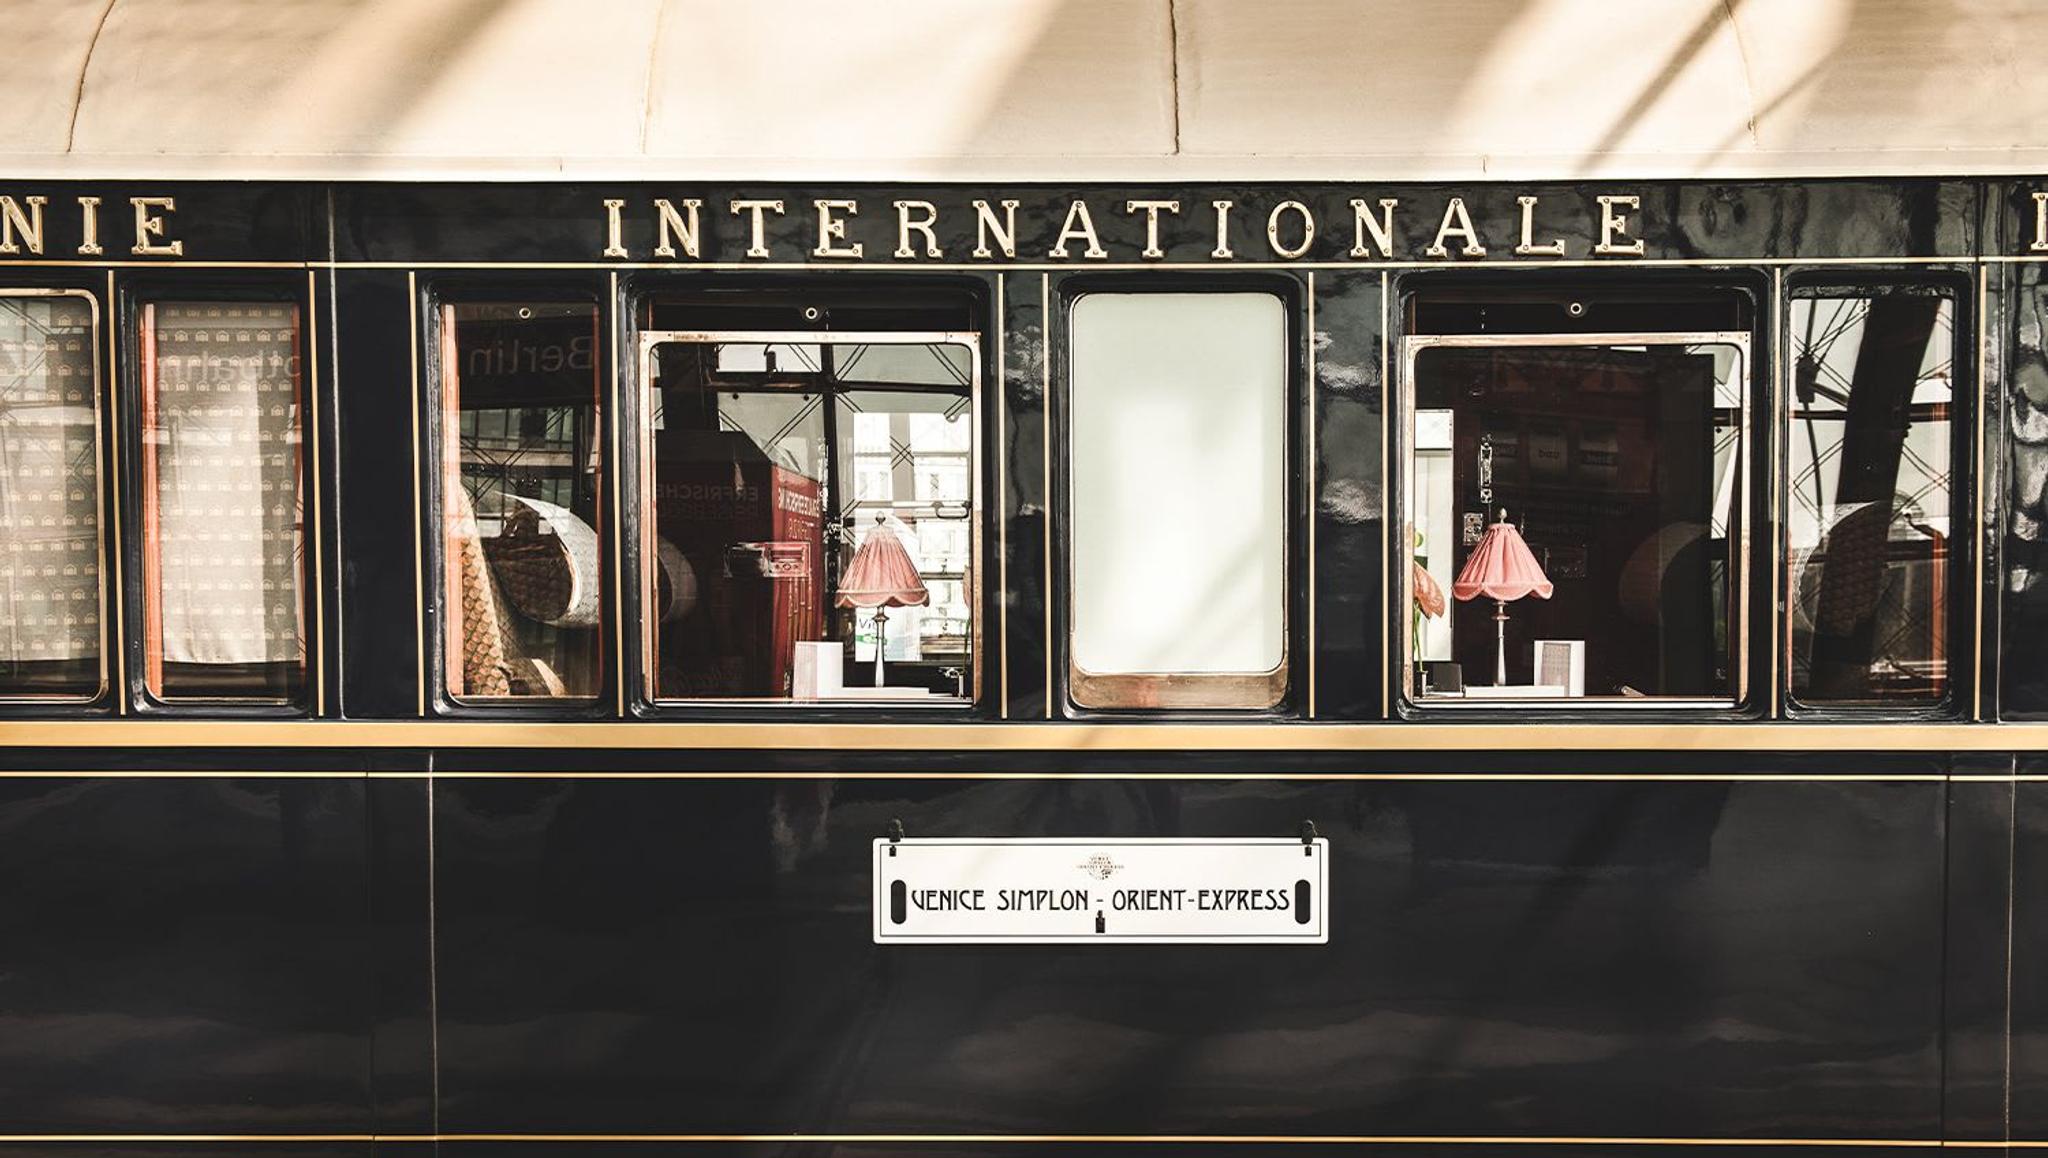 Time Traveling on the Venice Simplon-Orient-Express